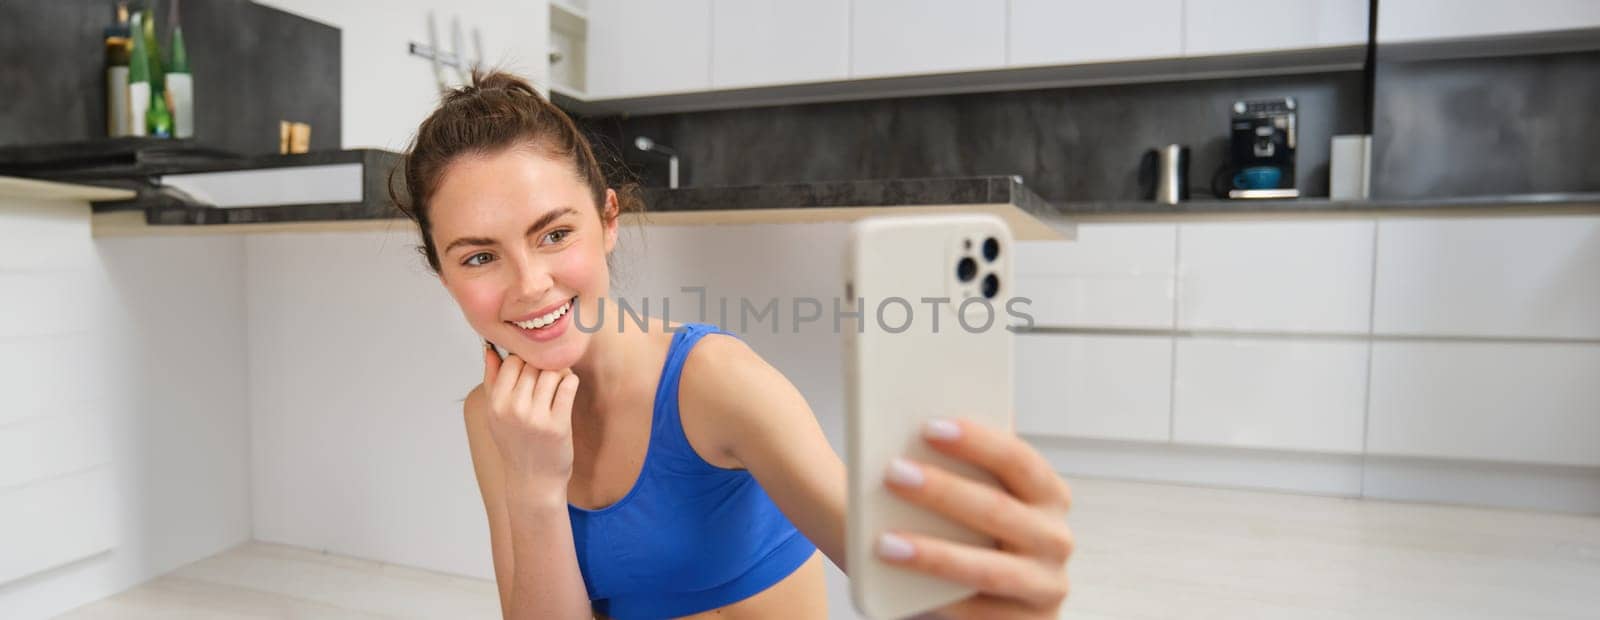 Woman doing workout training from home and taking selfie on smartphone camera, posing for photo inside her house, sits on rubber yoga mat in blue leggings and sportsbra.